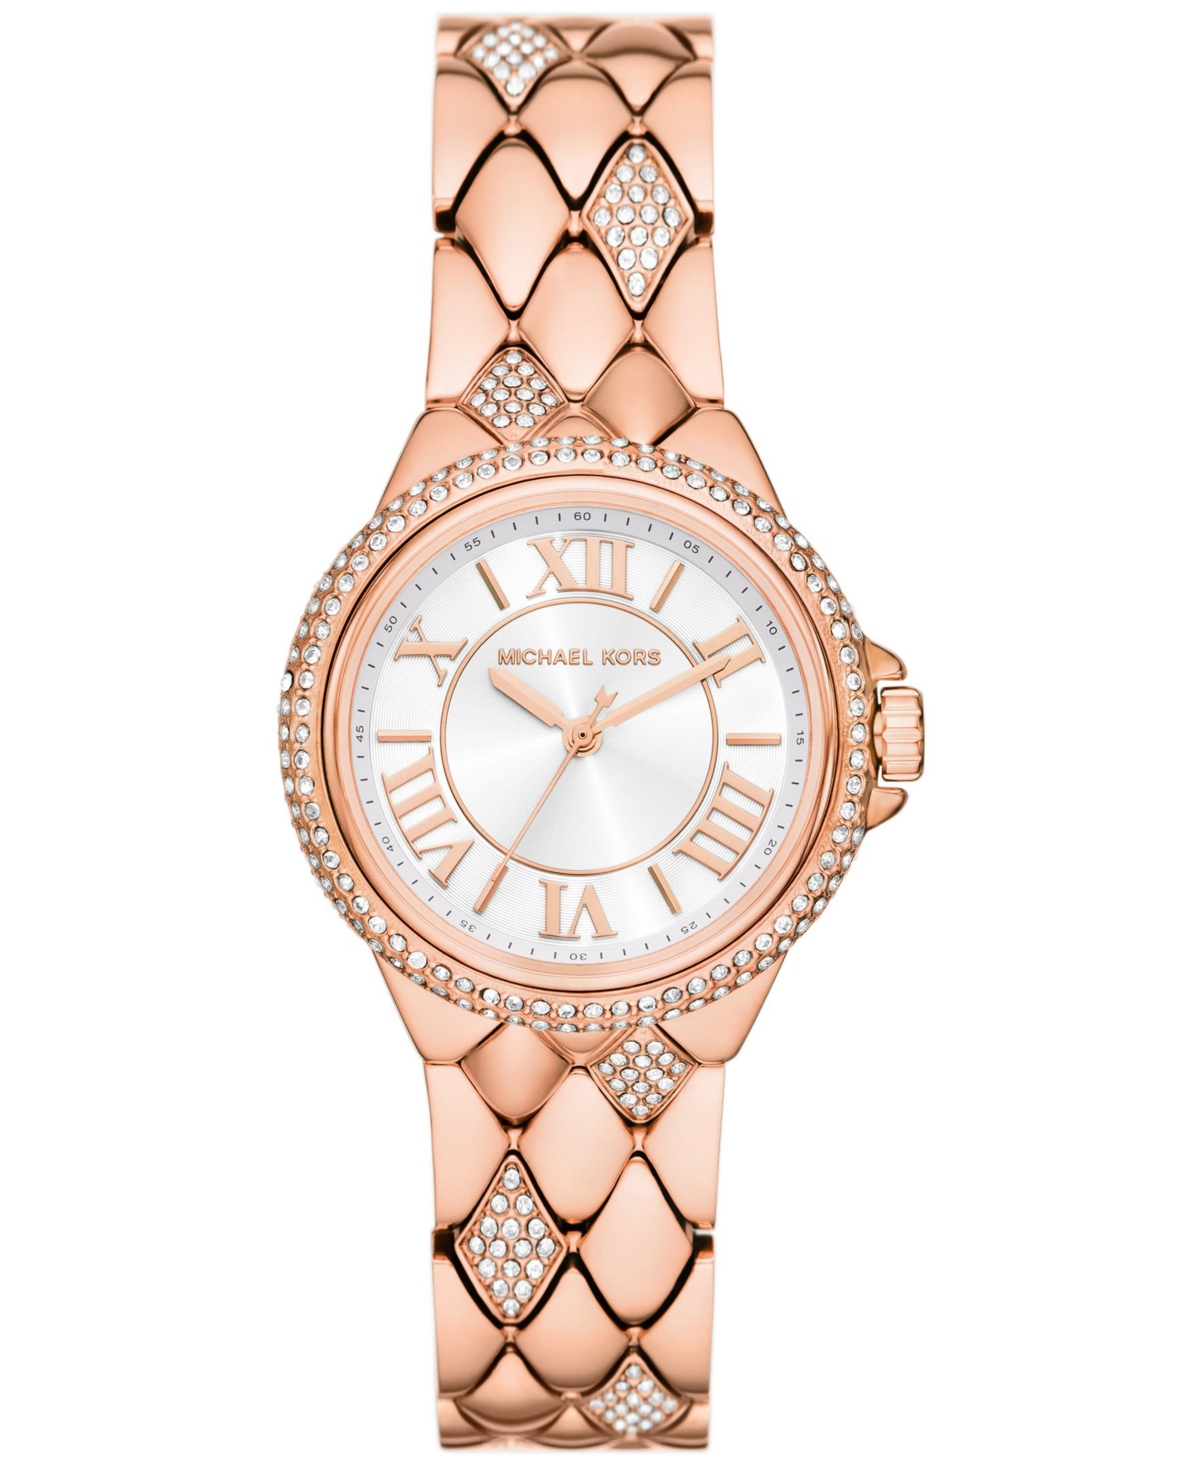 Michael Kors Women's Camille Three-hand Rose Gold-tone Stainless Steel Watch 33mm